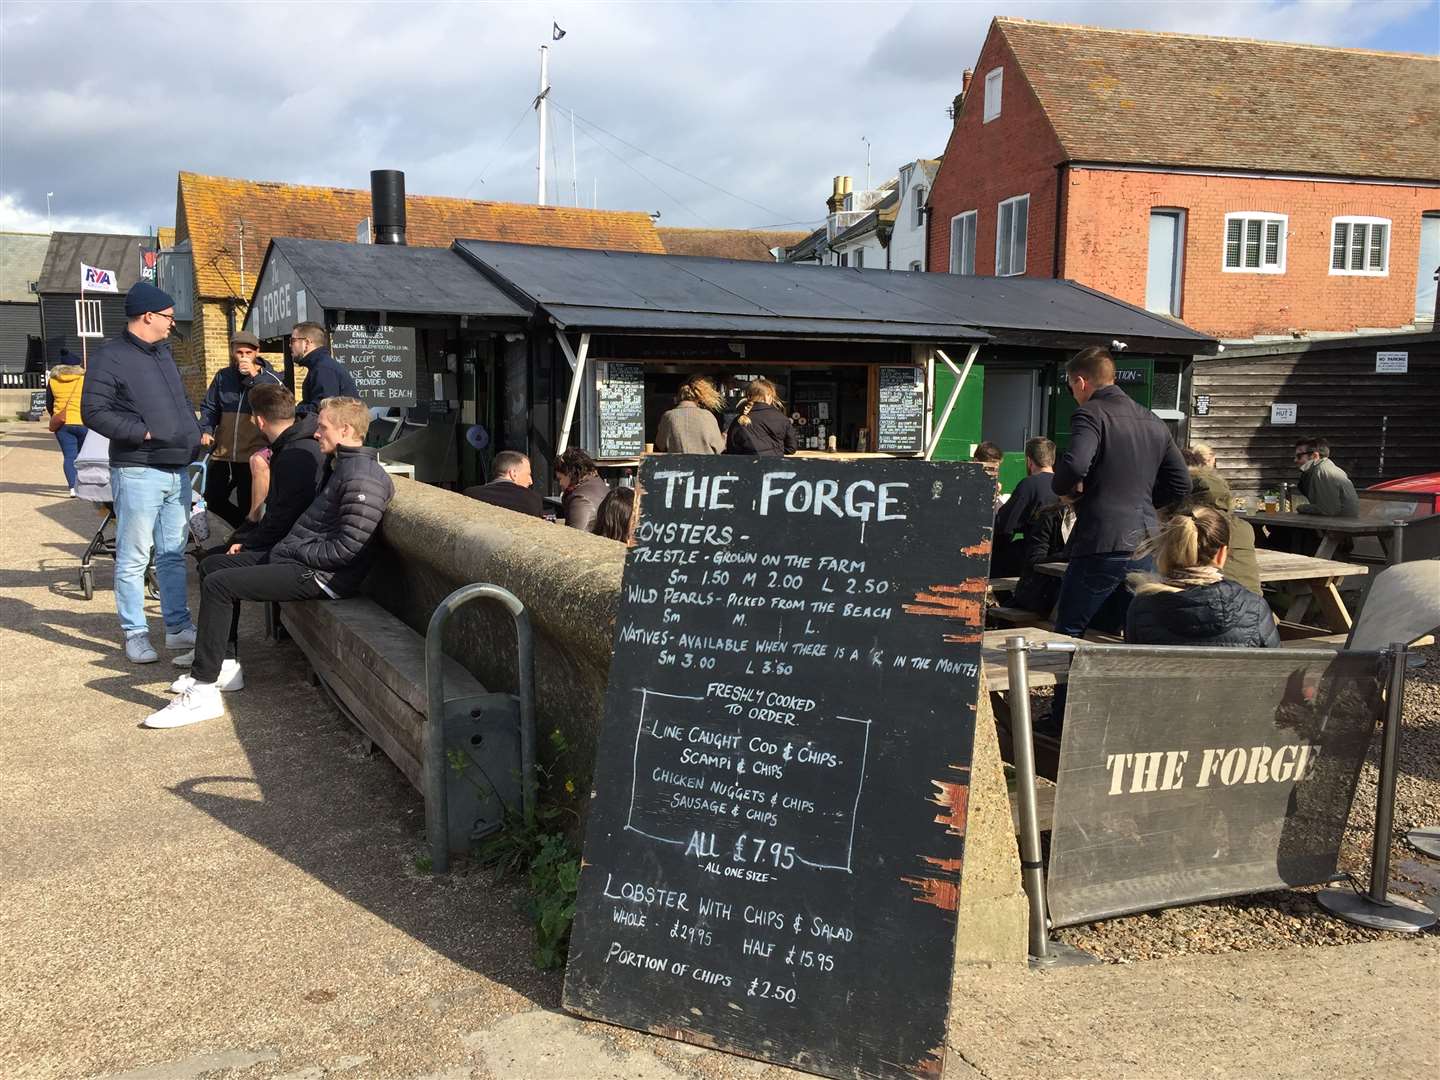 Plans were submitted to expand The Forge in Whitstable